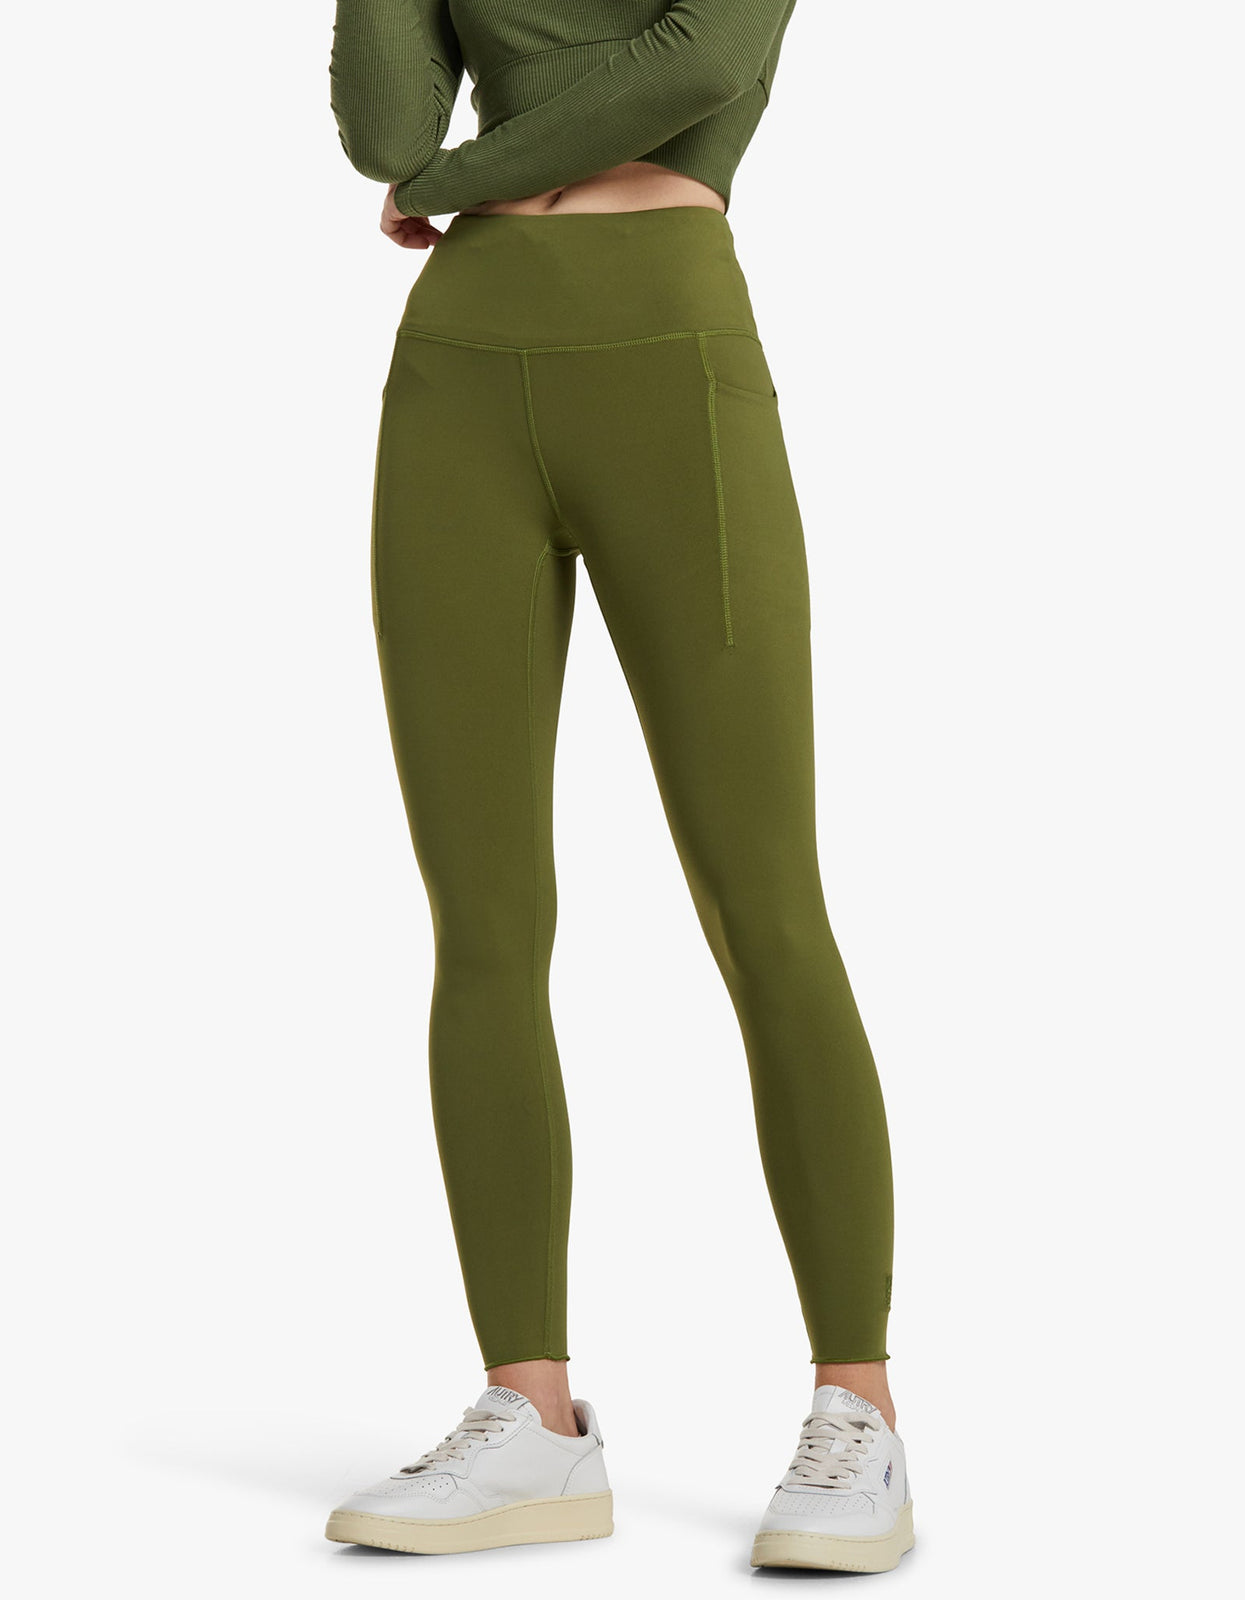 Lole Leggings Review  International Society of Precision Agriculture